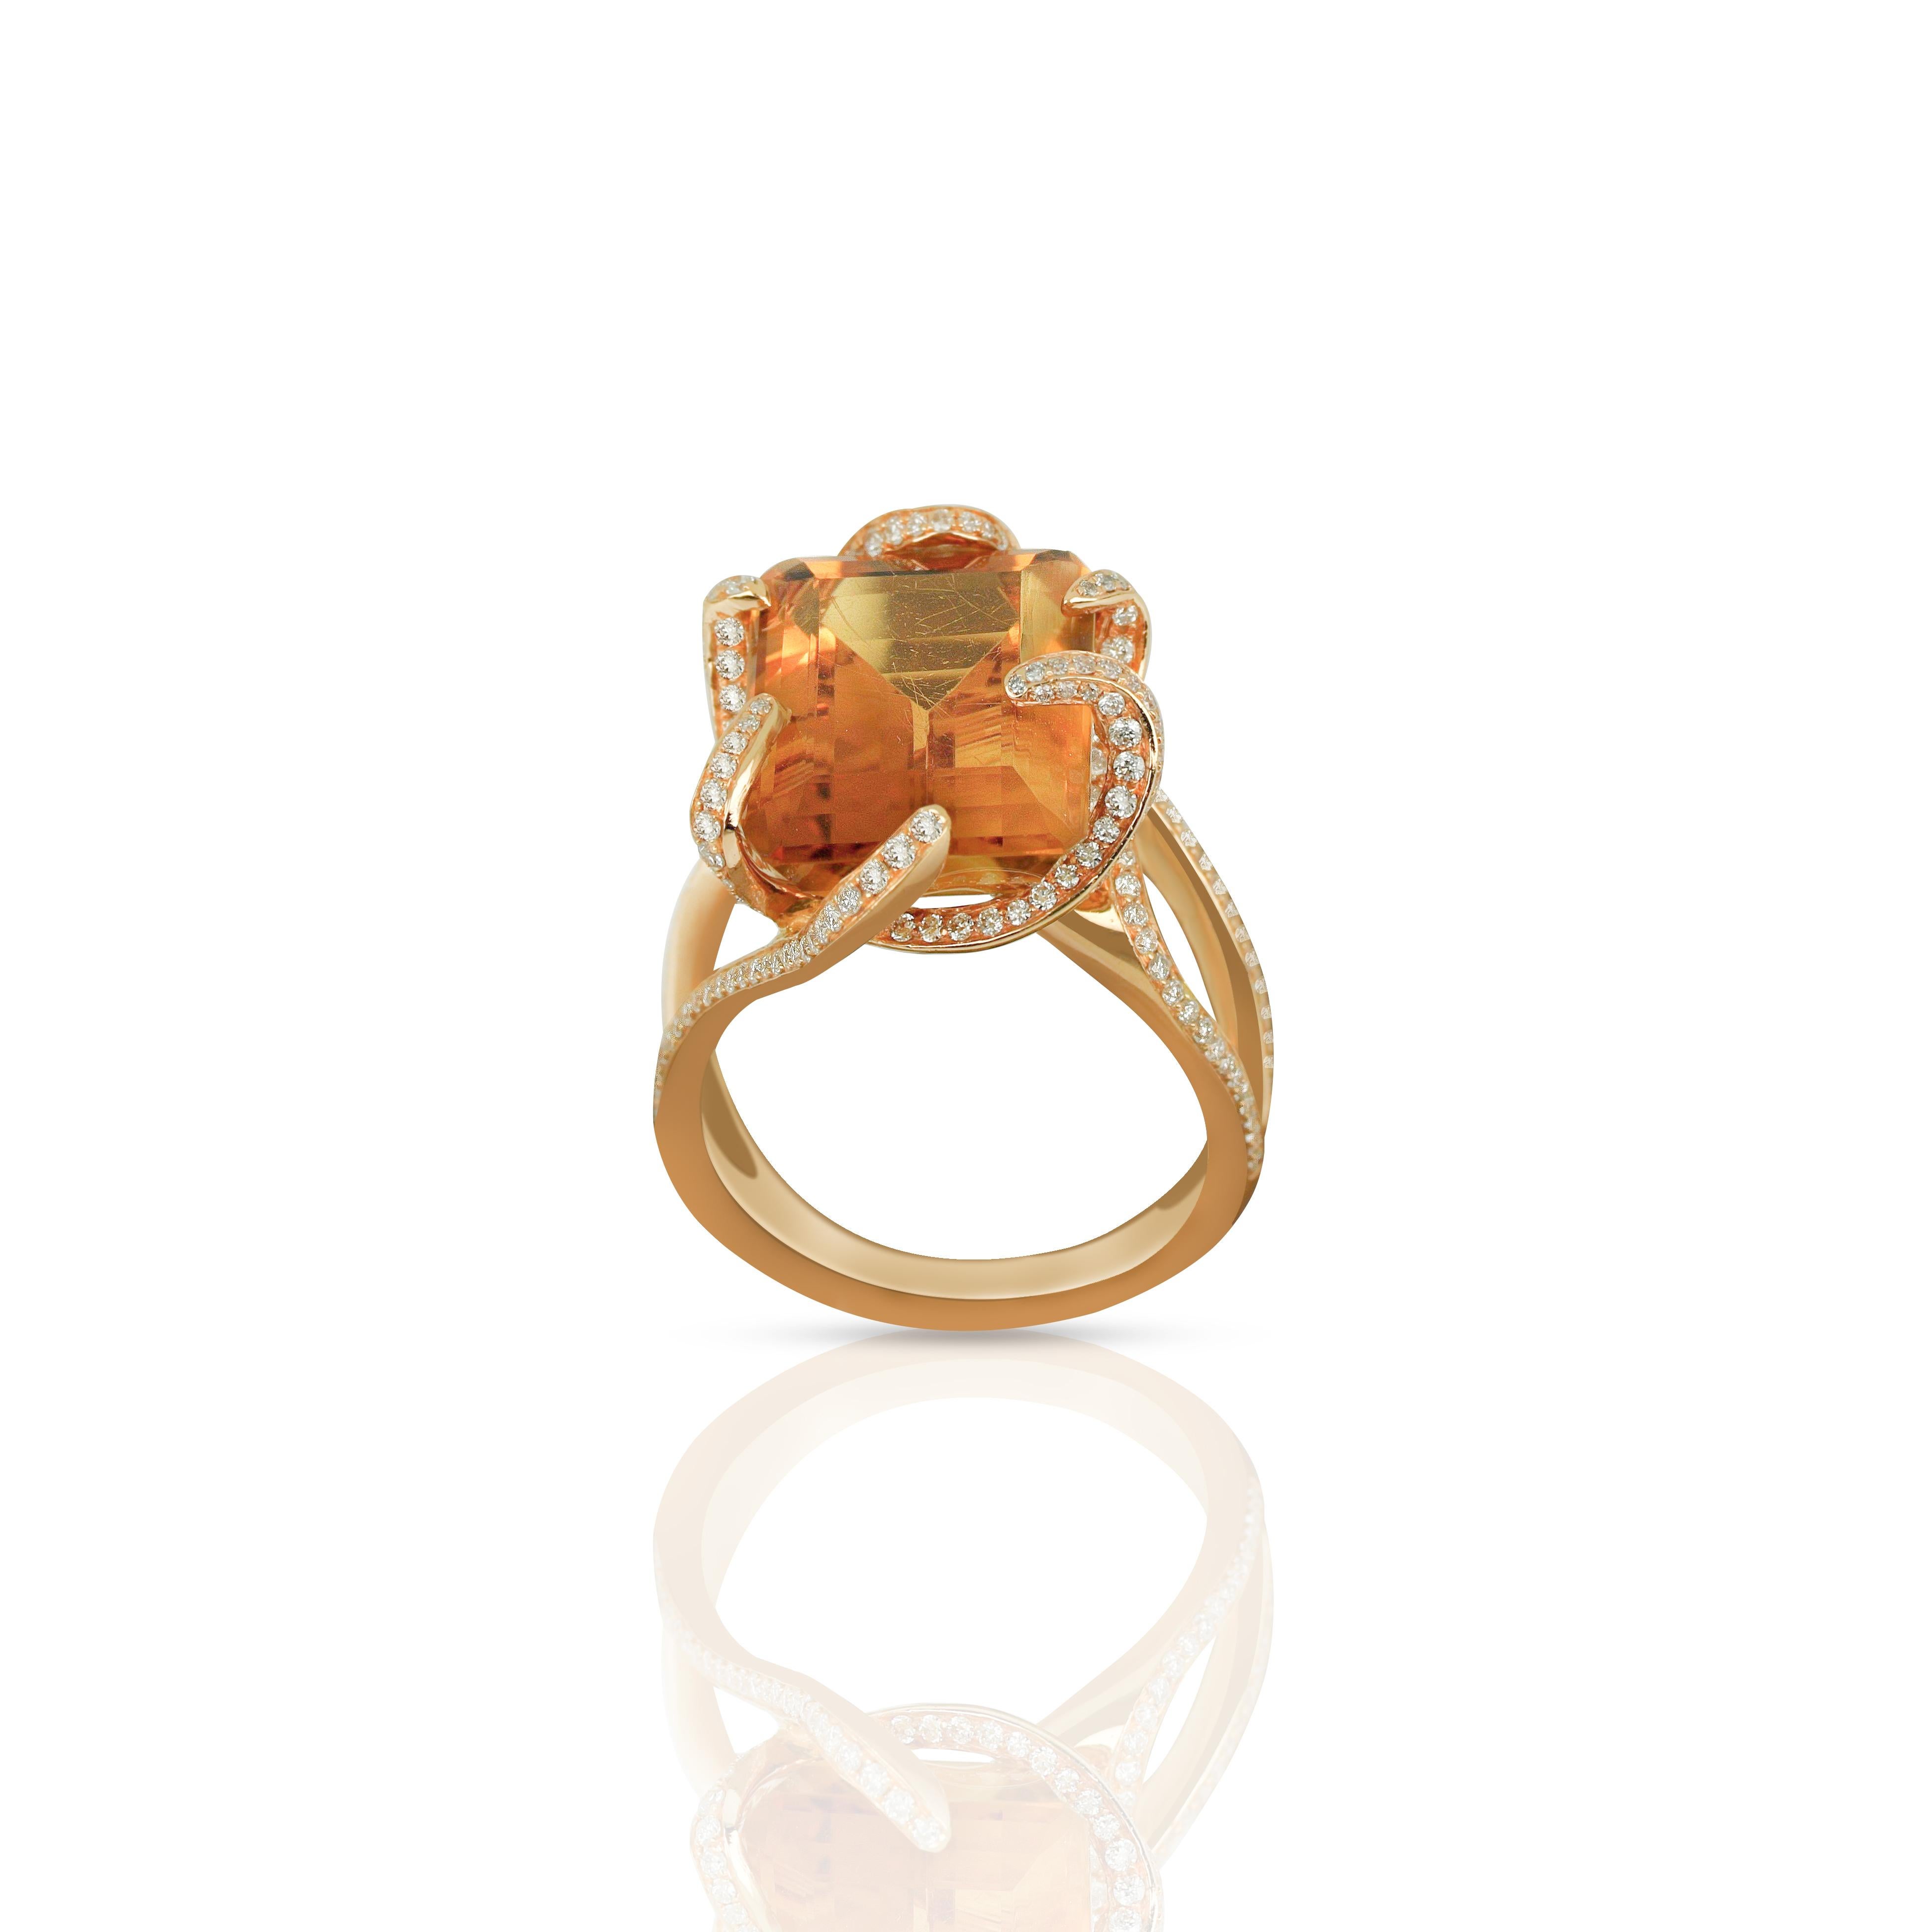 Artfully angled to display the magnificent centerpiece in Amwaj 18 karat rose gold ring that features emerald cut citrine that is swirled by white diamonds. With its delight, rounded edges, the timeless shape and color of the center stone makes a